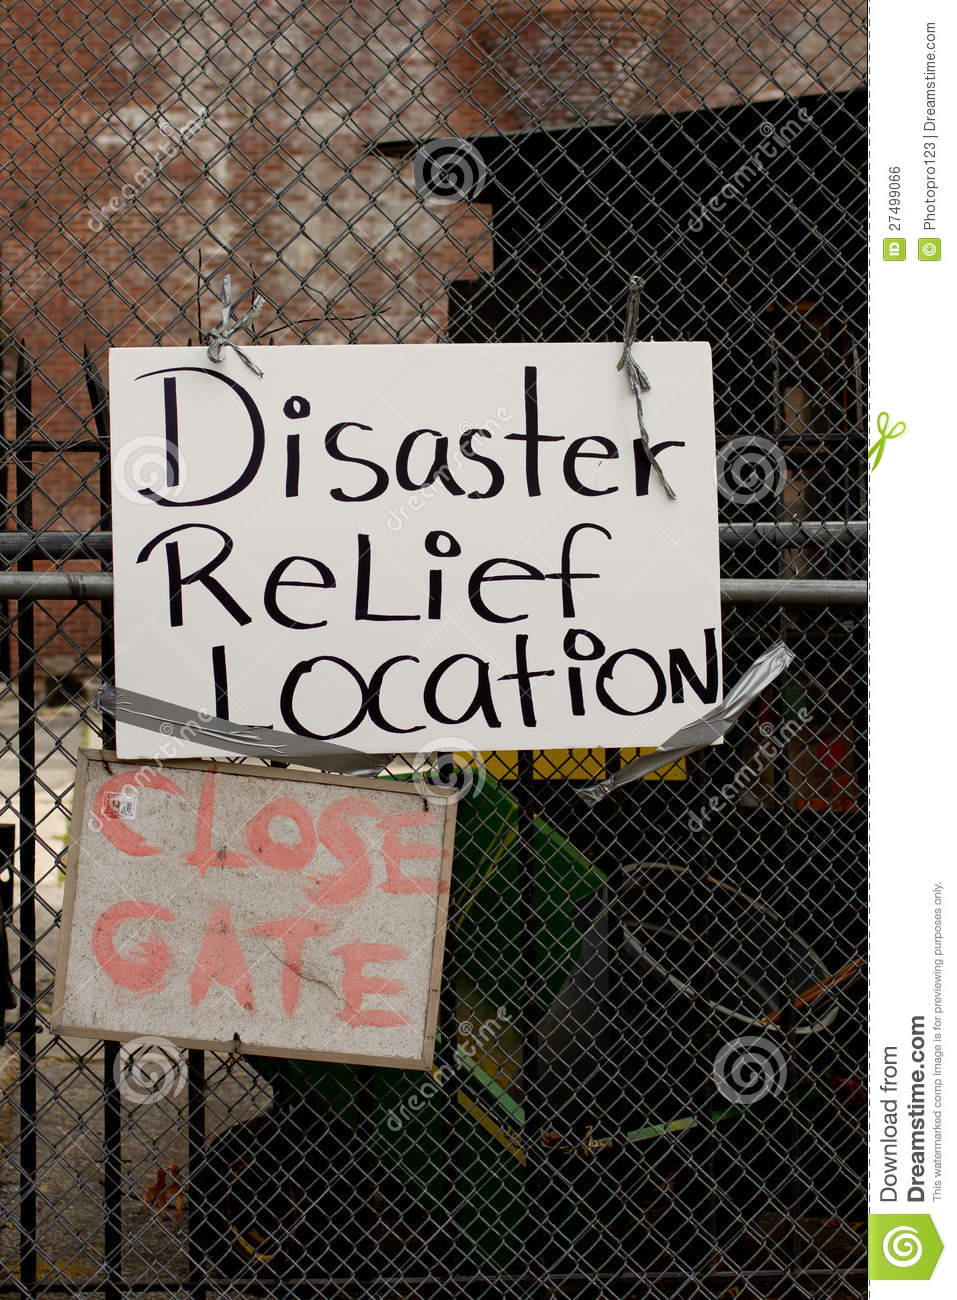 Disaster Relief Sign Royalty Free Stock Image   Image  27499066